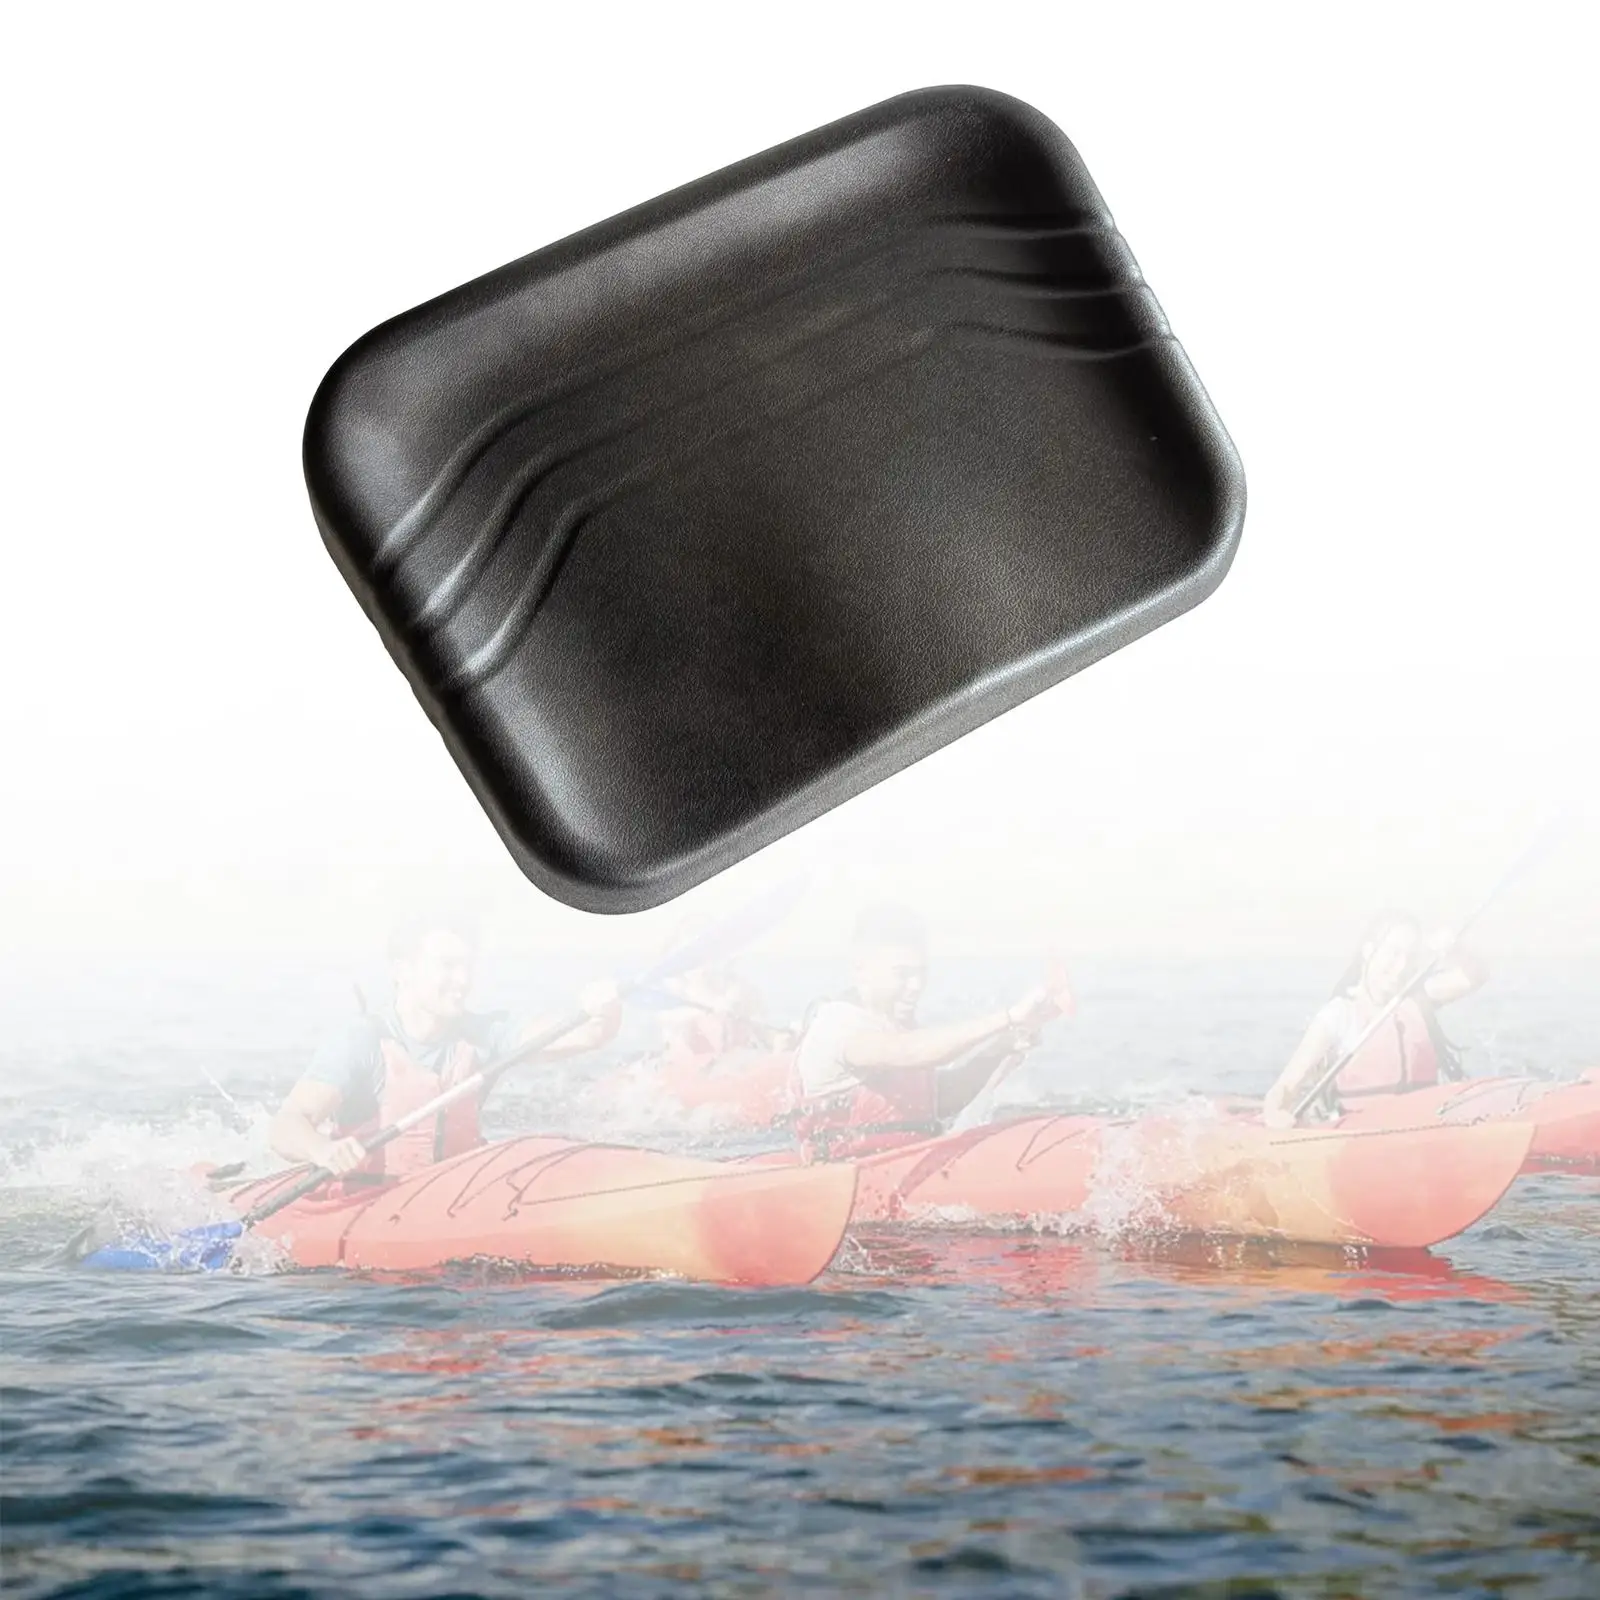 Rowing Machine Seat Cushion Pad High Hardness Cover Seat Cushion for Indoor Adult